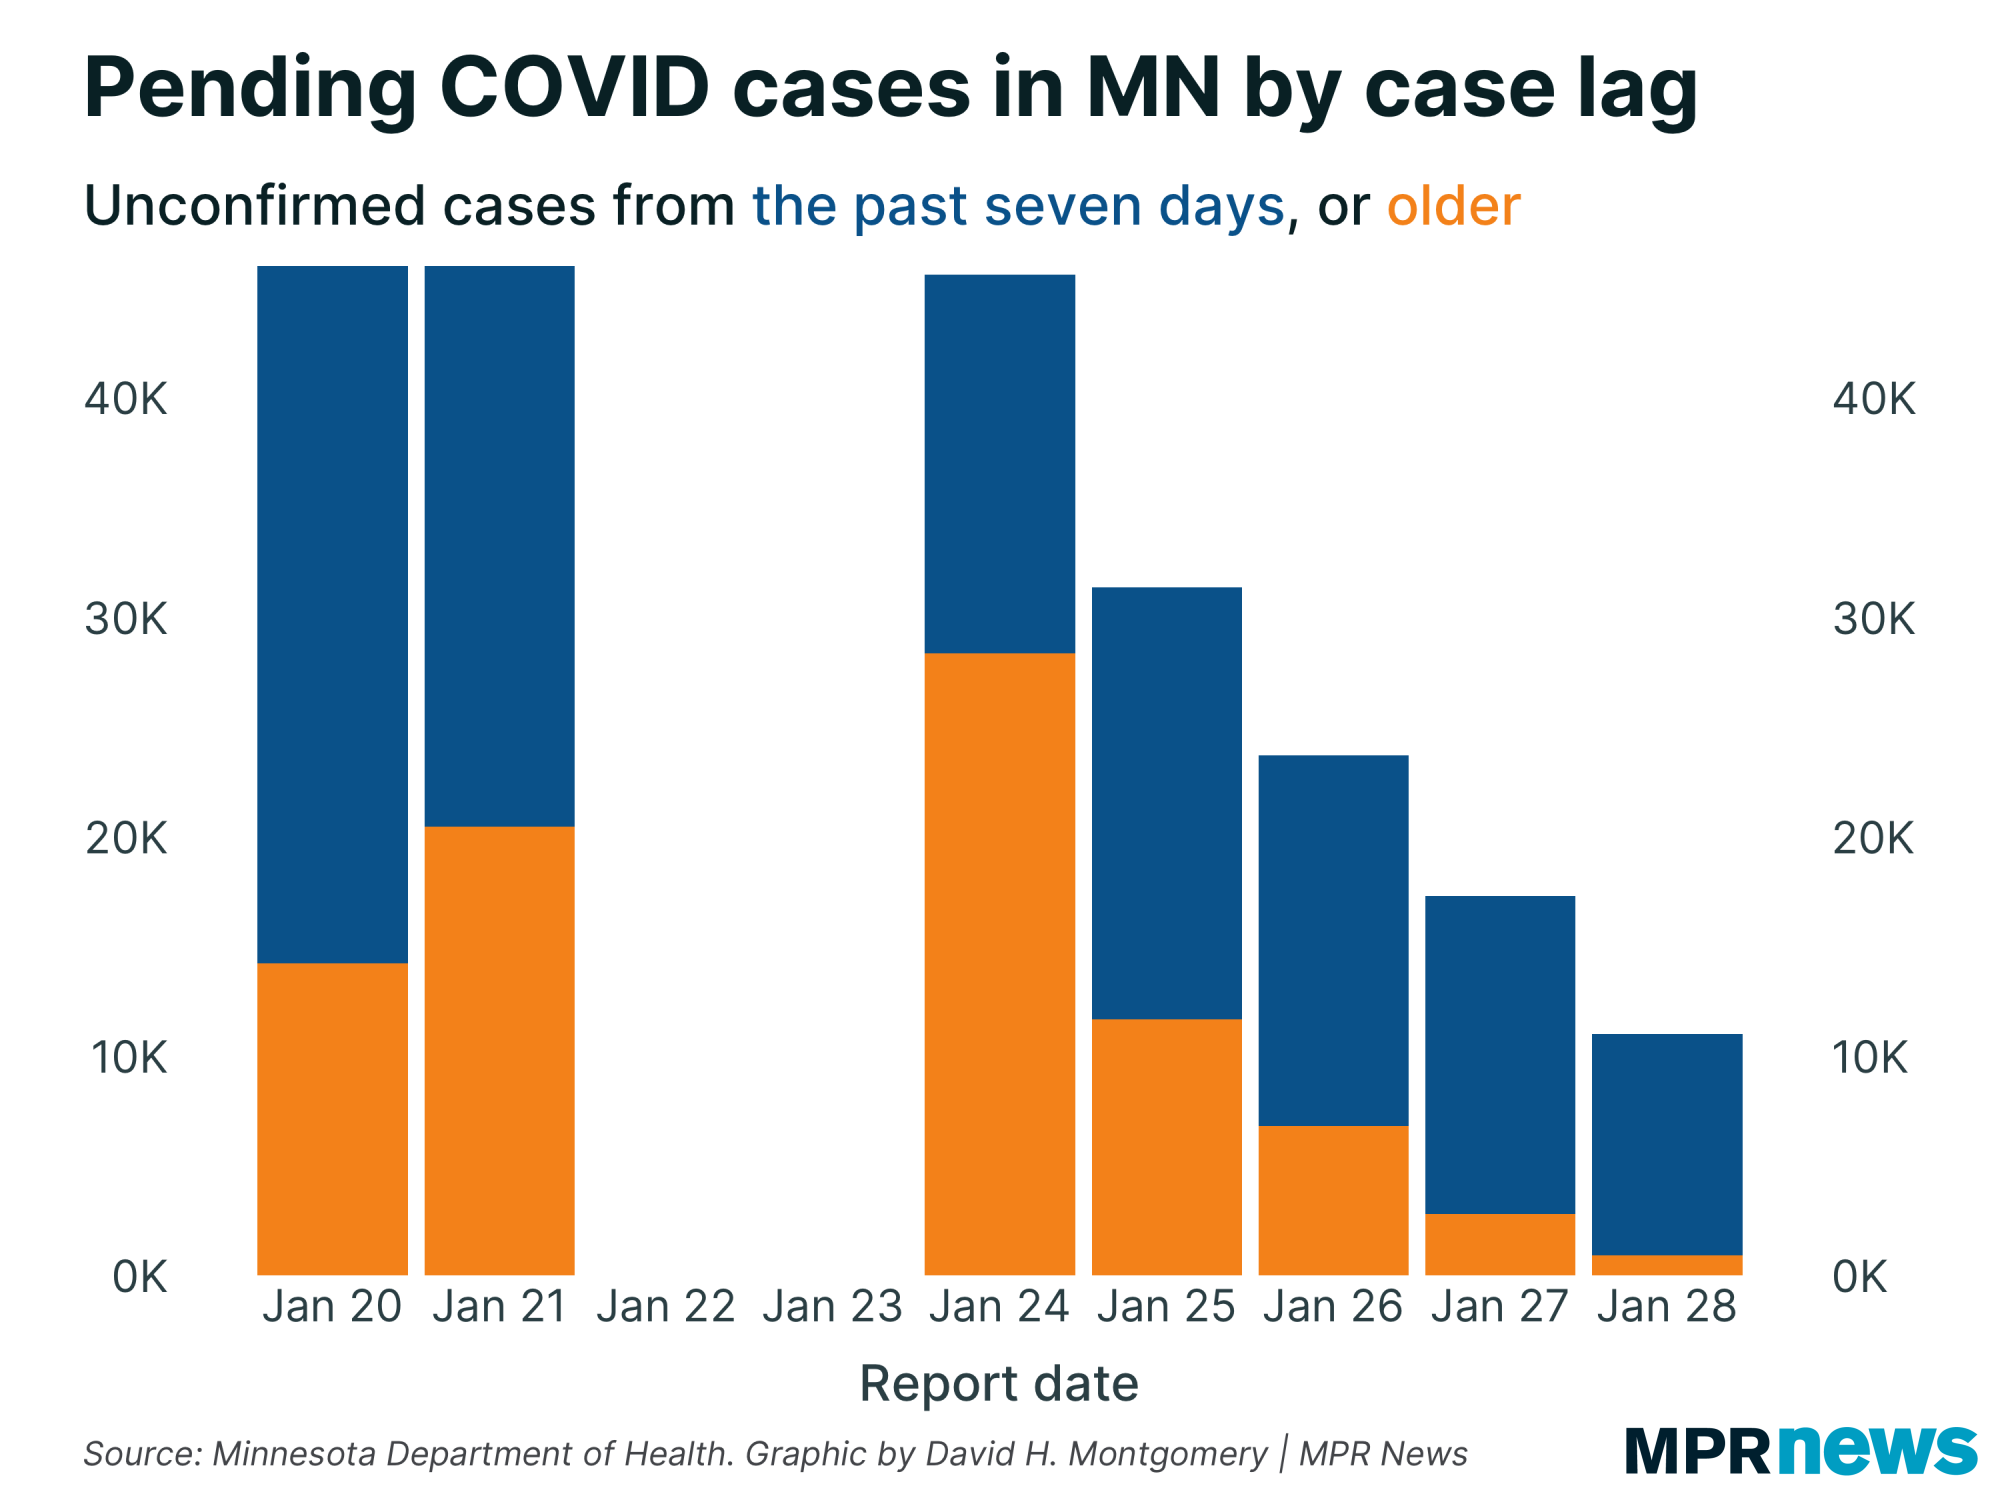 Graph of COVID-19 pending cases in Minnesota by the case lag